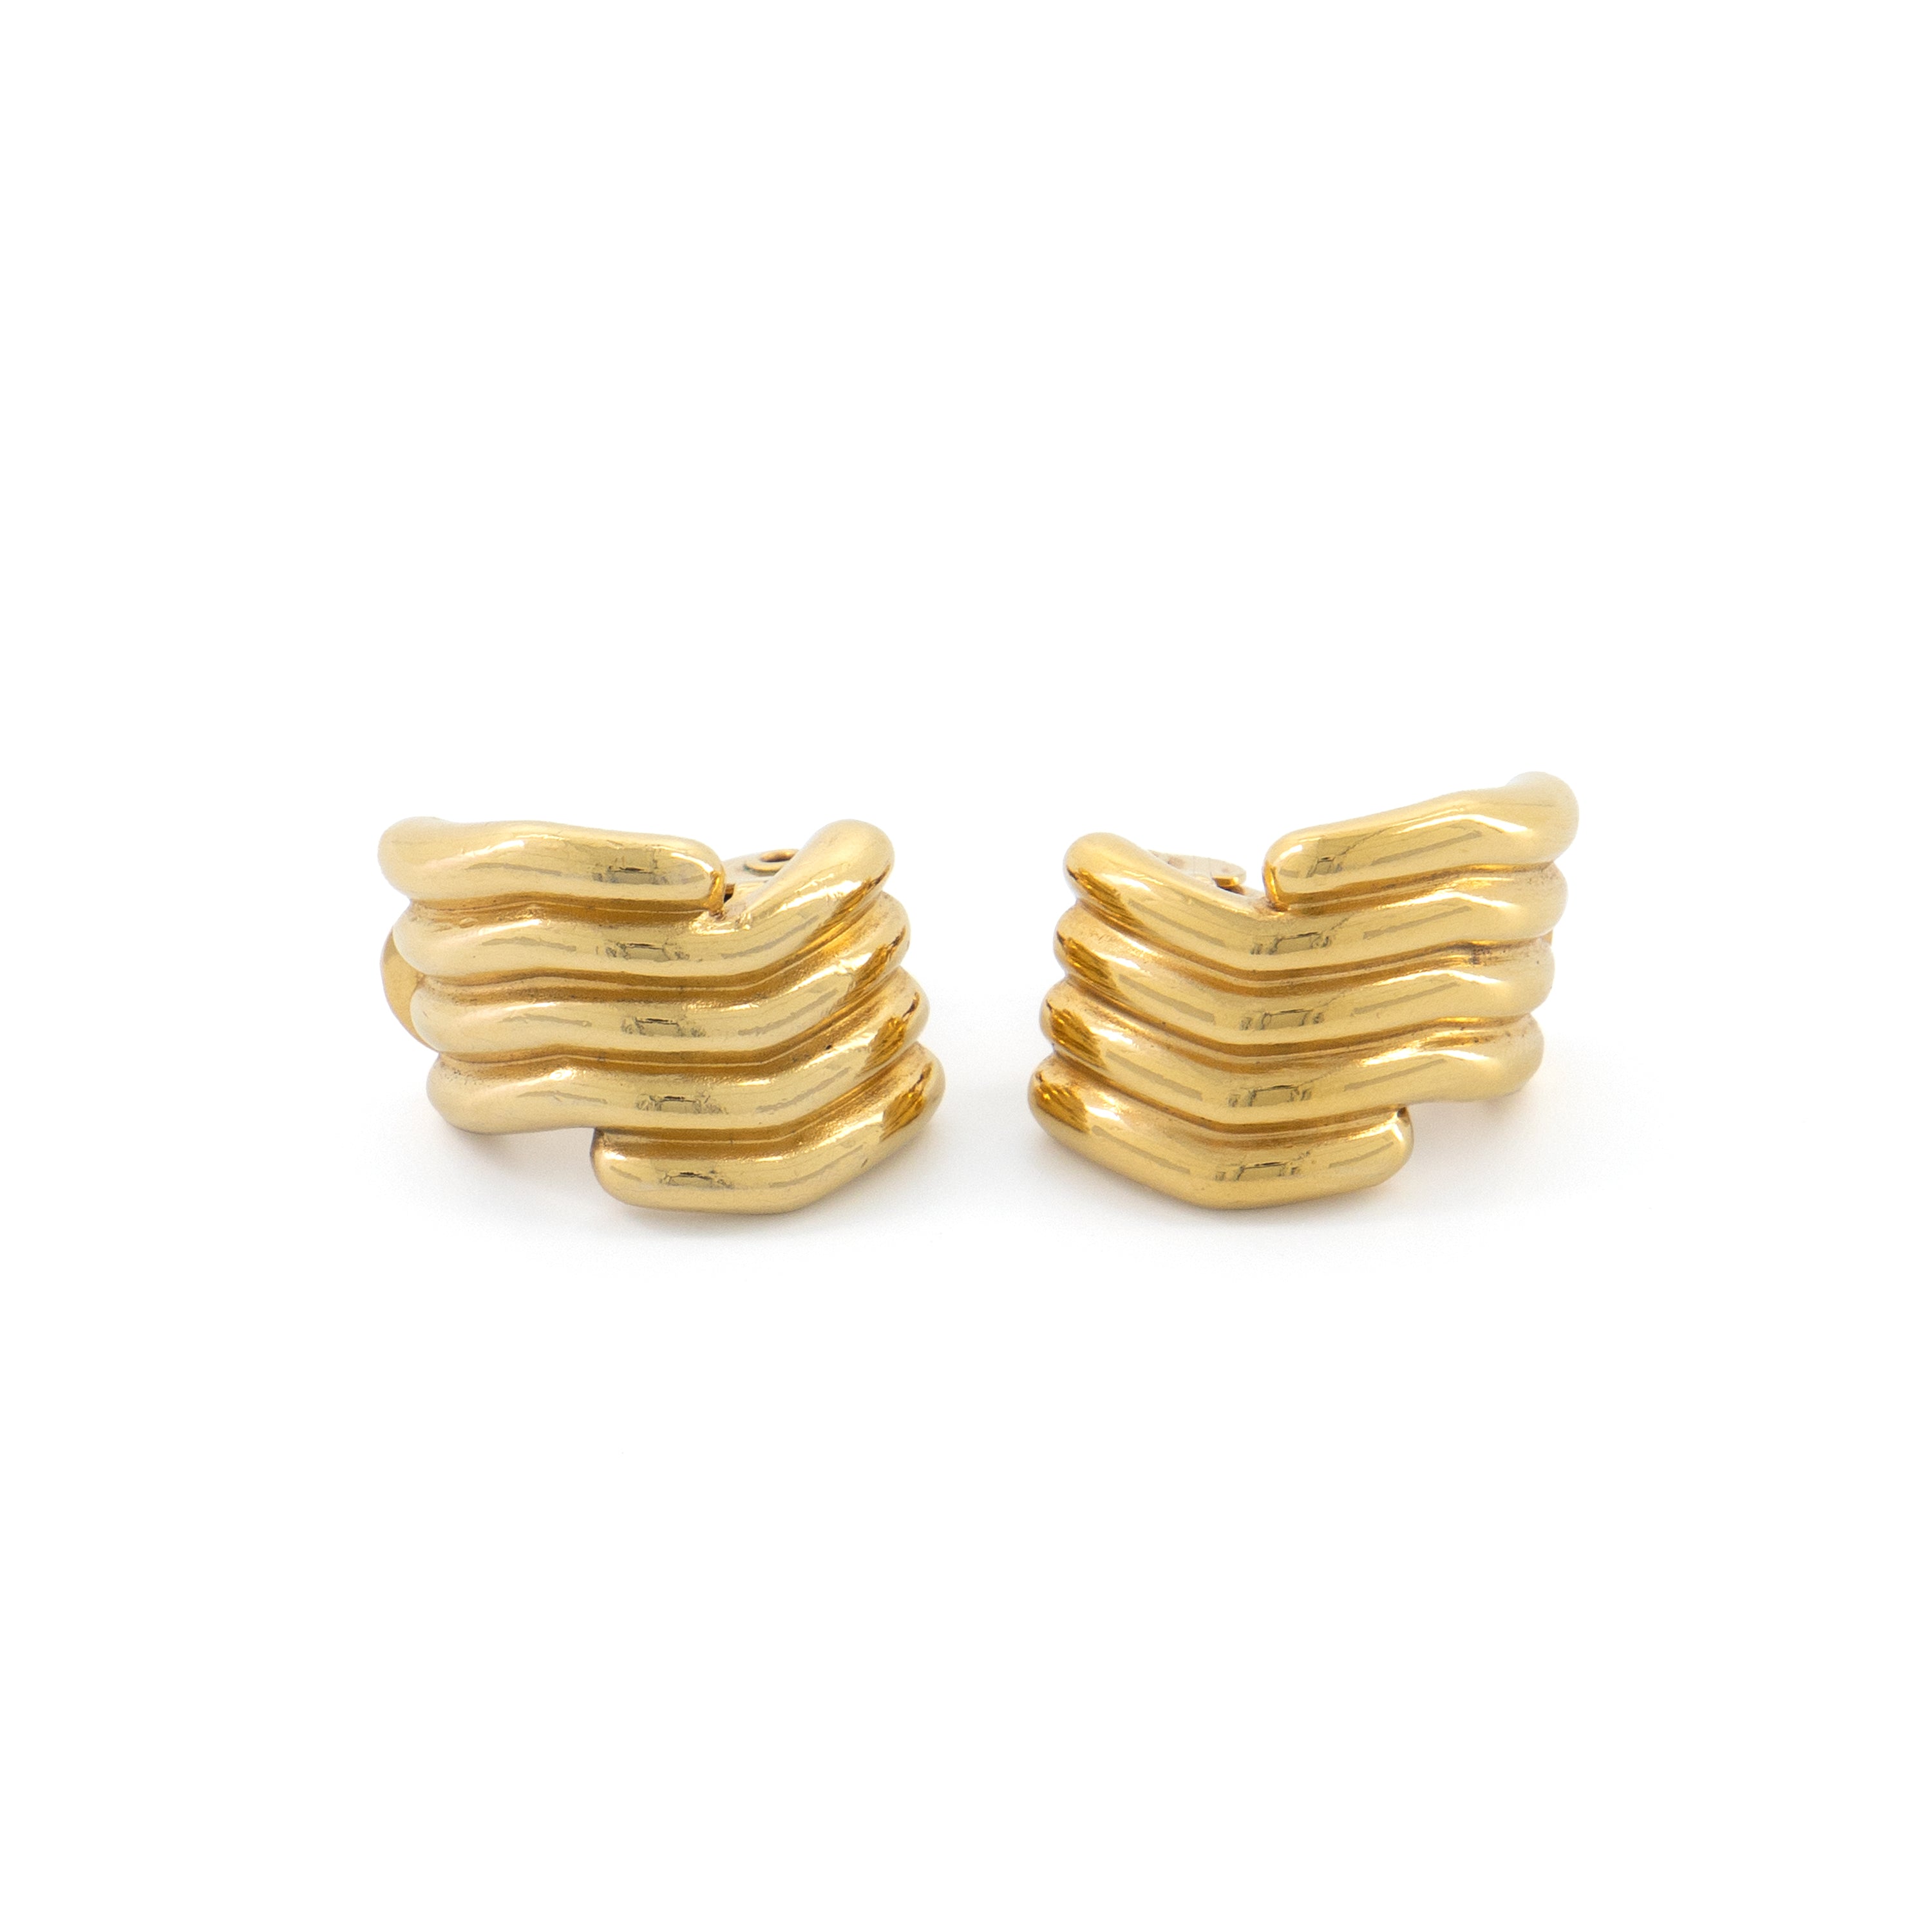 Monet Abstract Ribbed Ear Clips